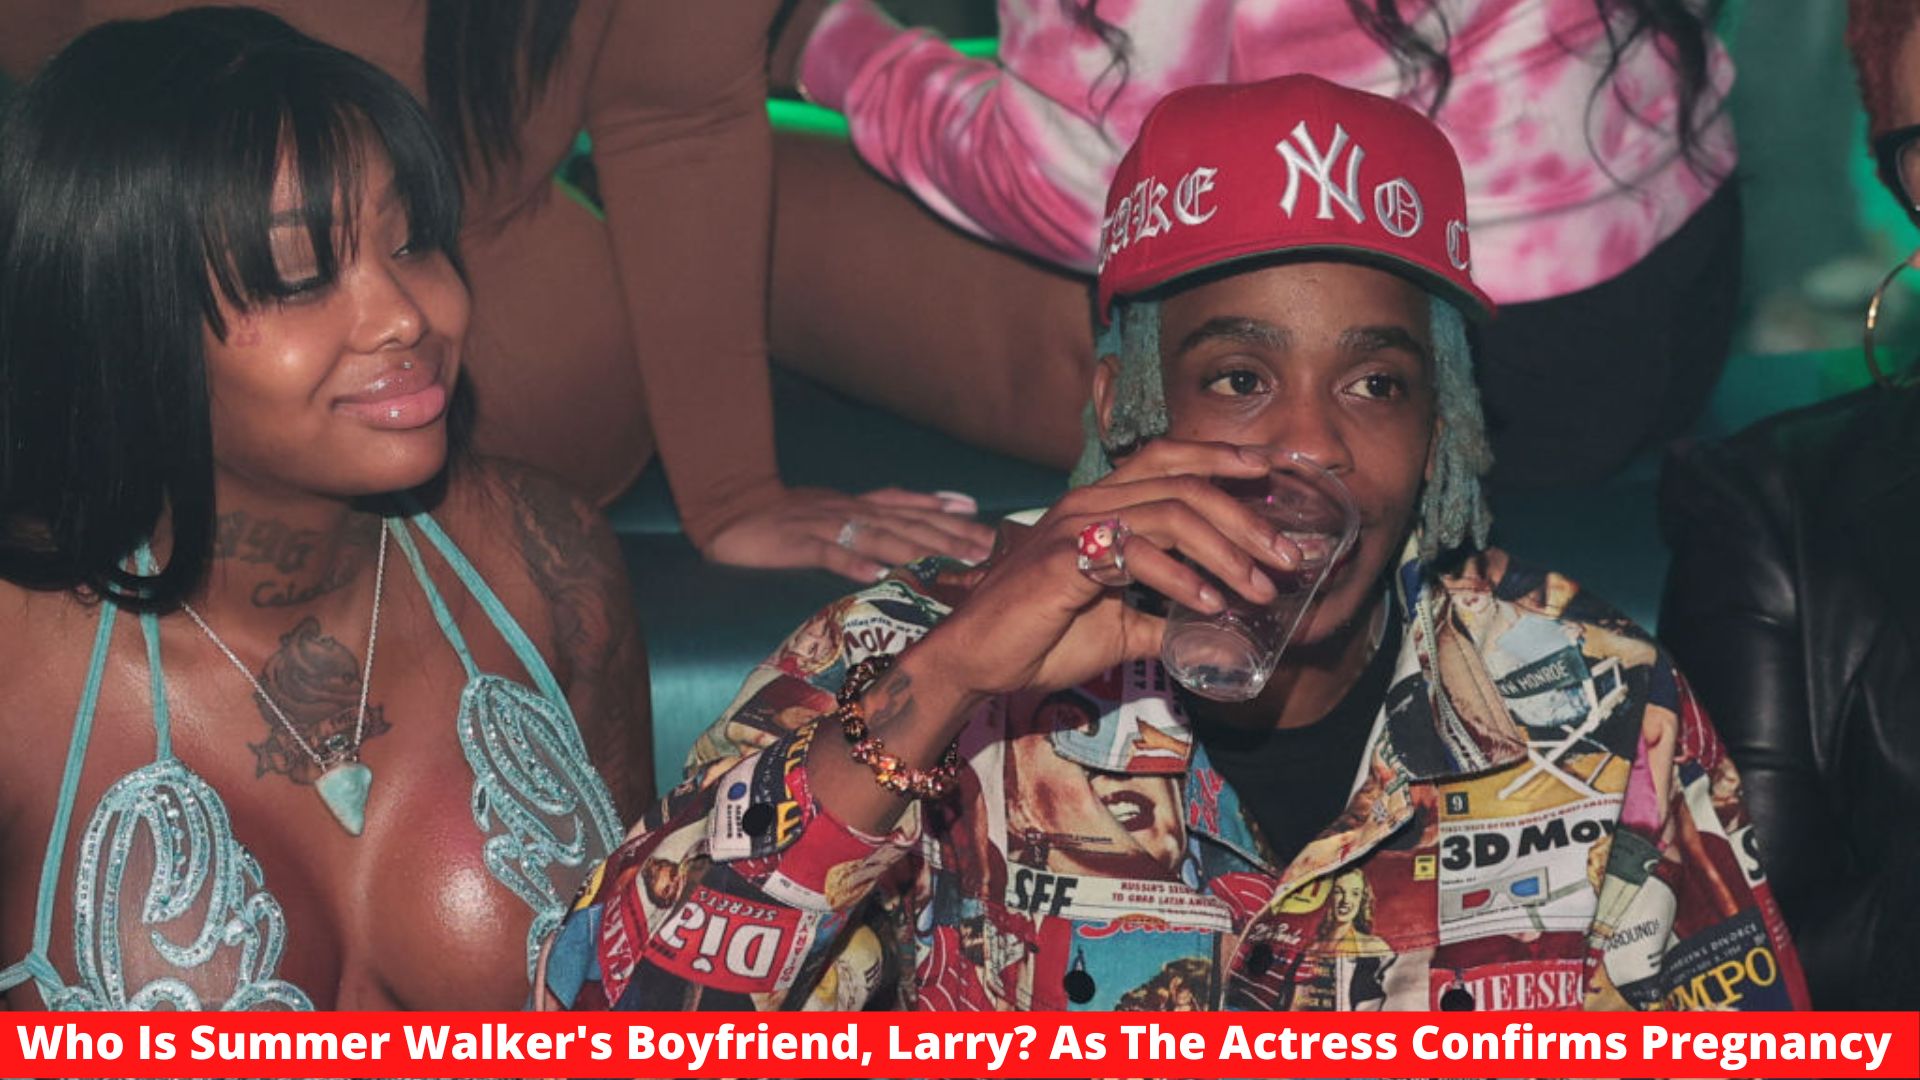 Who Is Summer Walker's Boyfriend, Larry? As The Actress Confirms Pregnancy